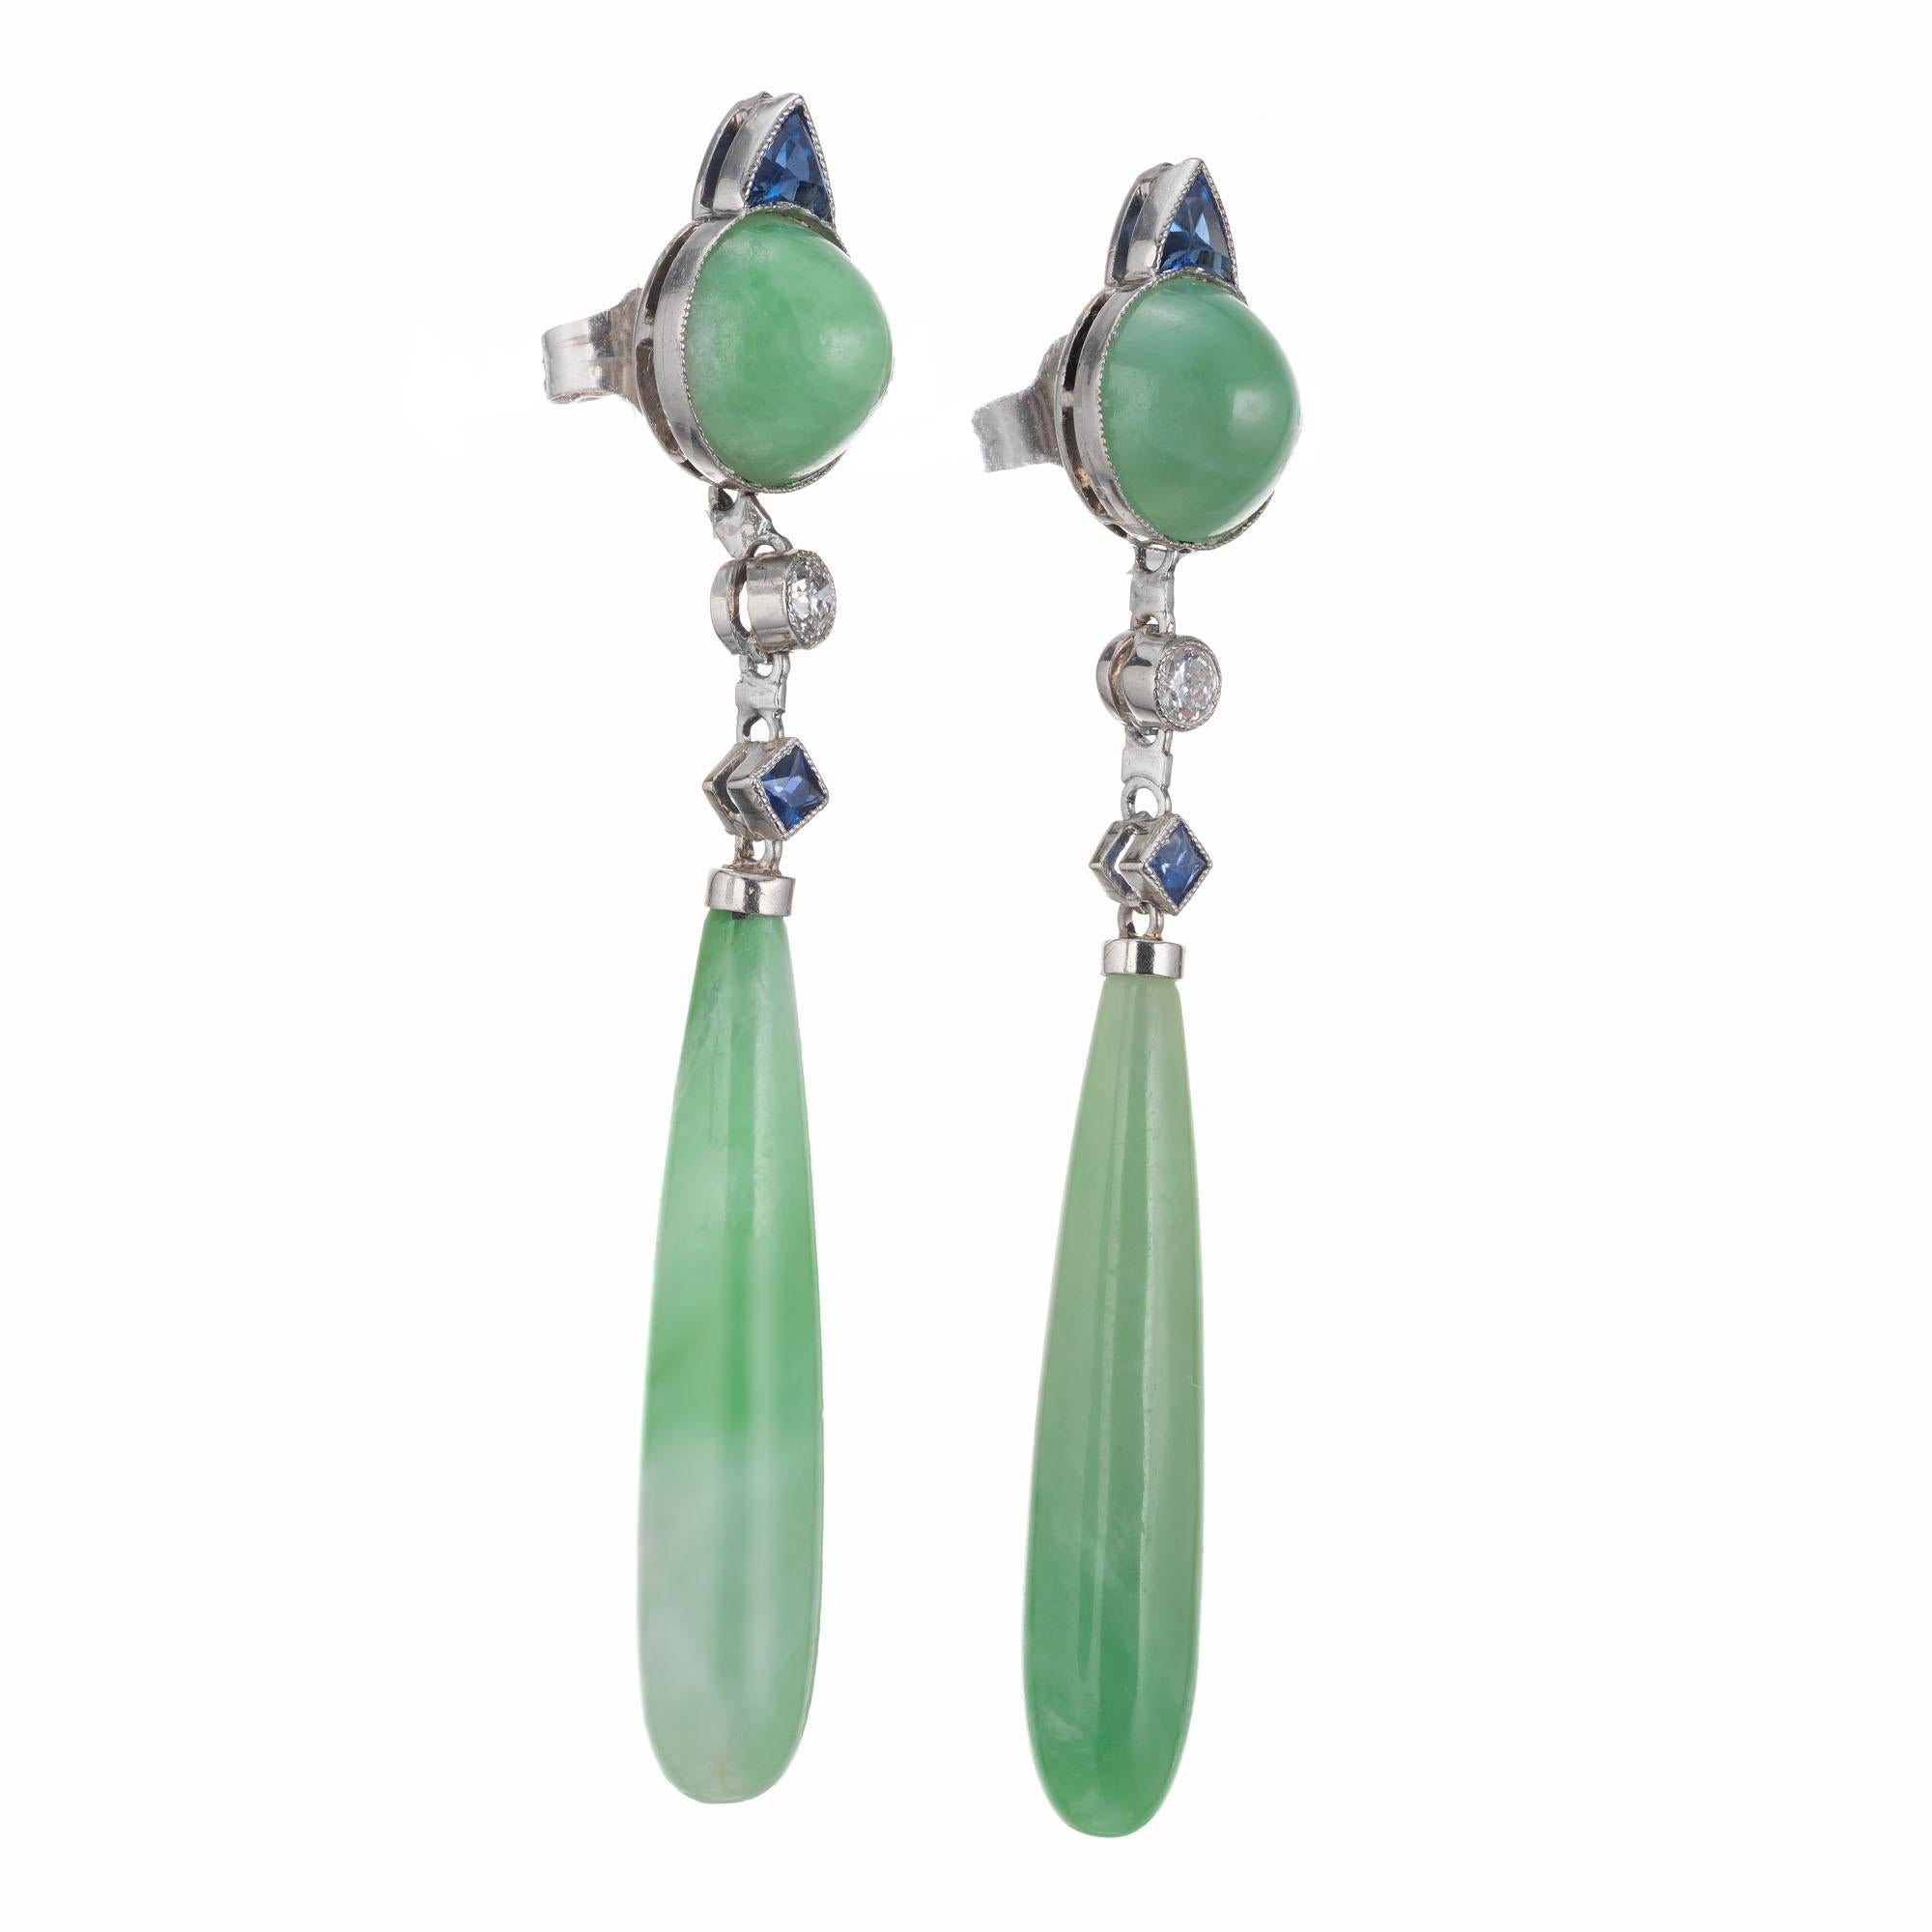 1920's Art Deco Jadiete Jade, diamond and sapphire dangle earrings. GIA Certified untreated jade with diamond and sapphire accents. Platinum. 

2 round cabochon mottled green jadeite jade 7.3mm GIA Certificate # 2205587567
2 cylinder drops mottled